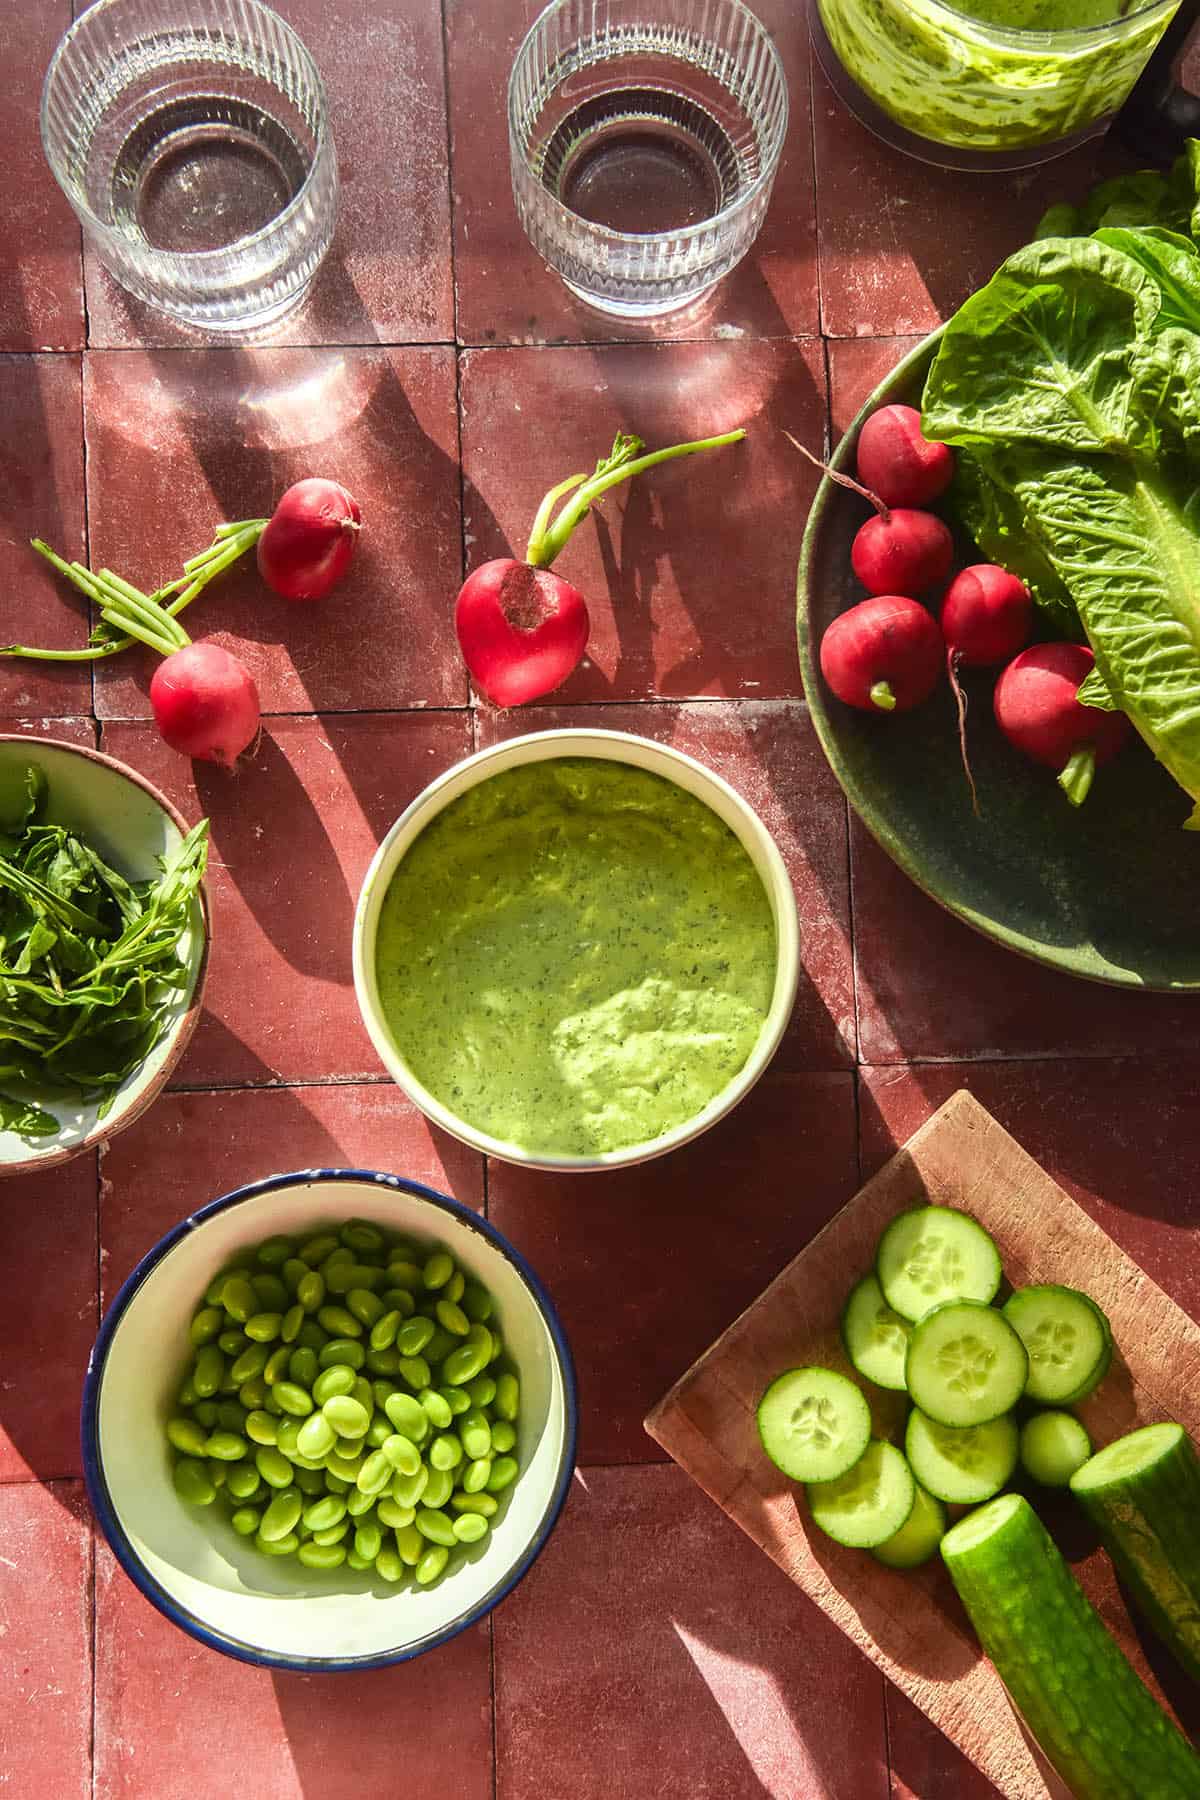 A sunlit aerial view of a bowl of low FODMAP Green Goddess salad dressing on a terracotta tile backdrop. The dressing is surrounded by ingredients for a salad and sunlit glasses of water.